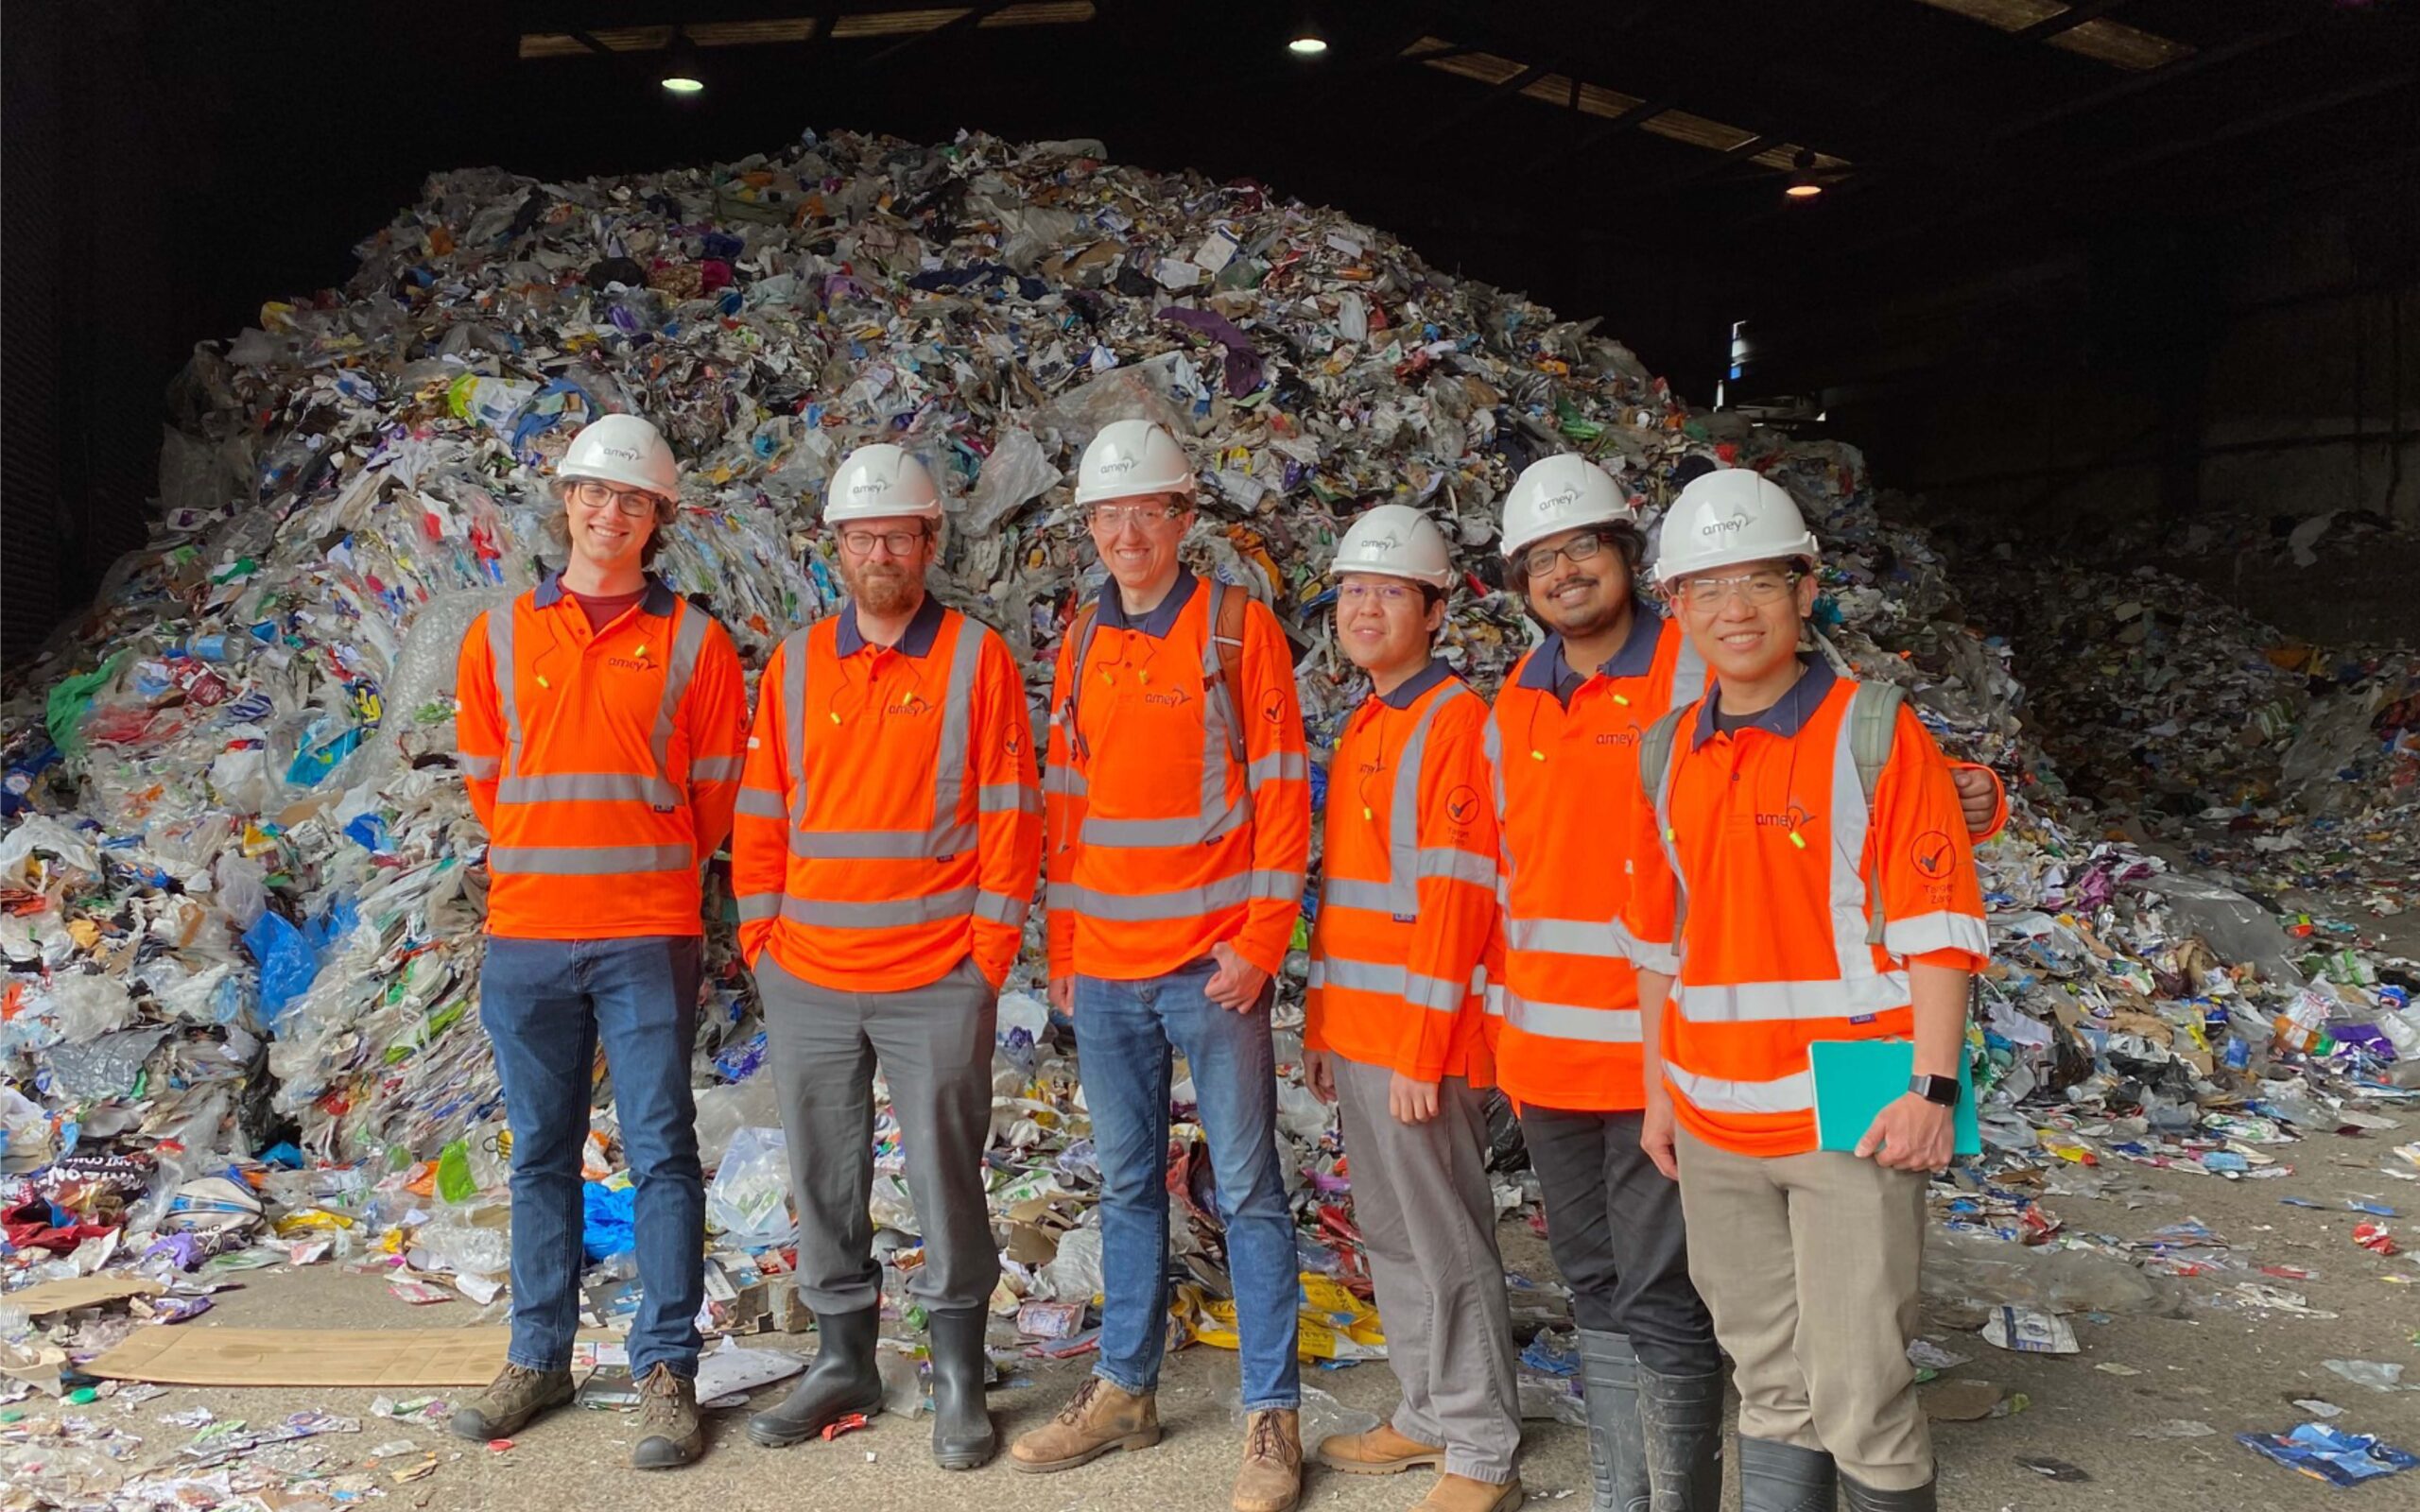 Erwin and colleagues at Amey recycling plant